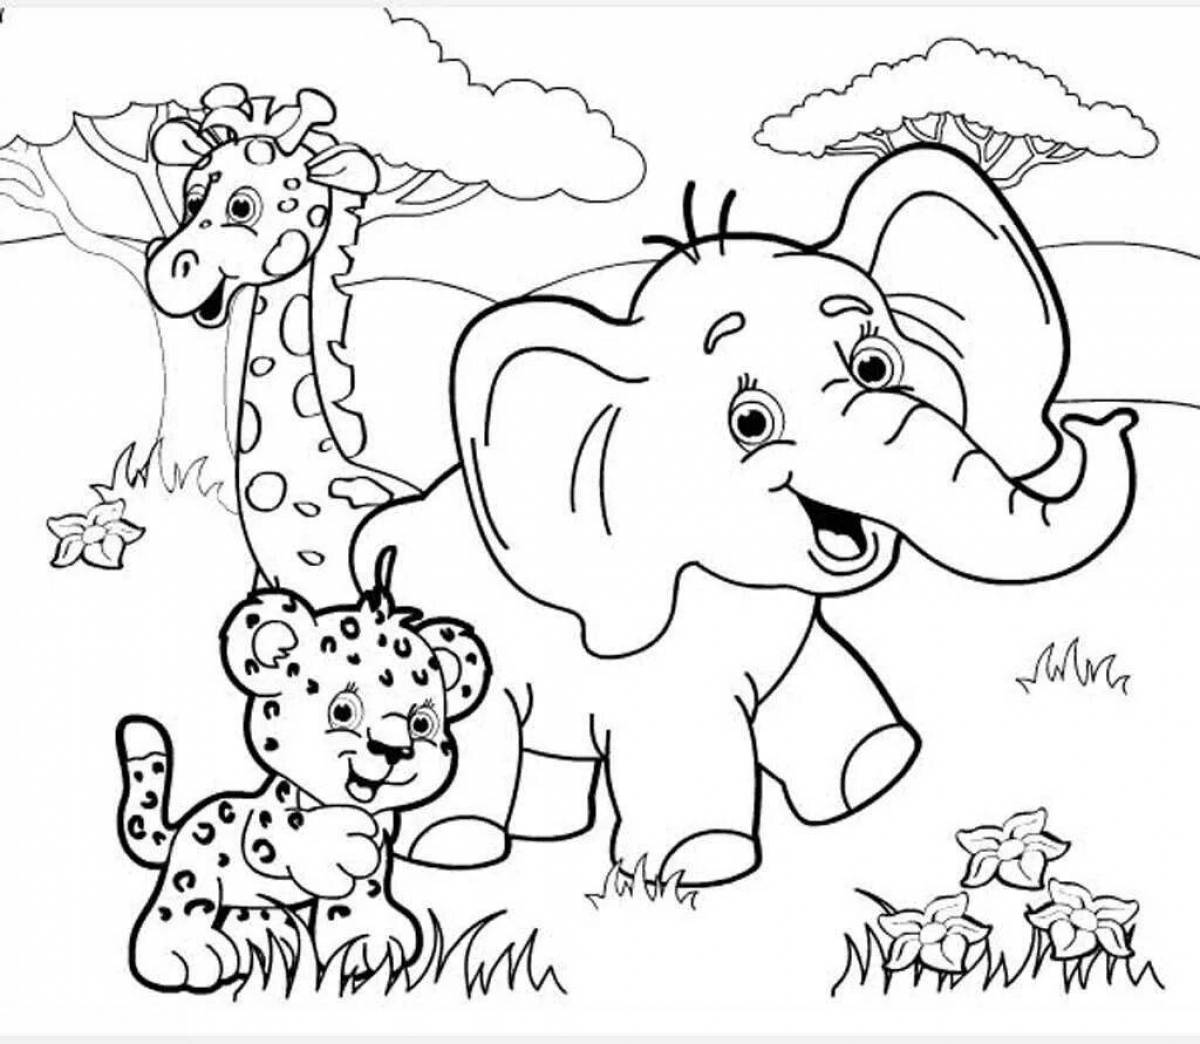 Colorful animal coloring book for children 6-7 years old